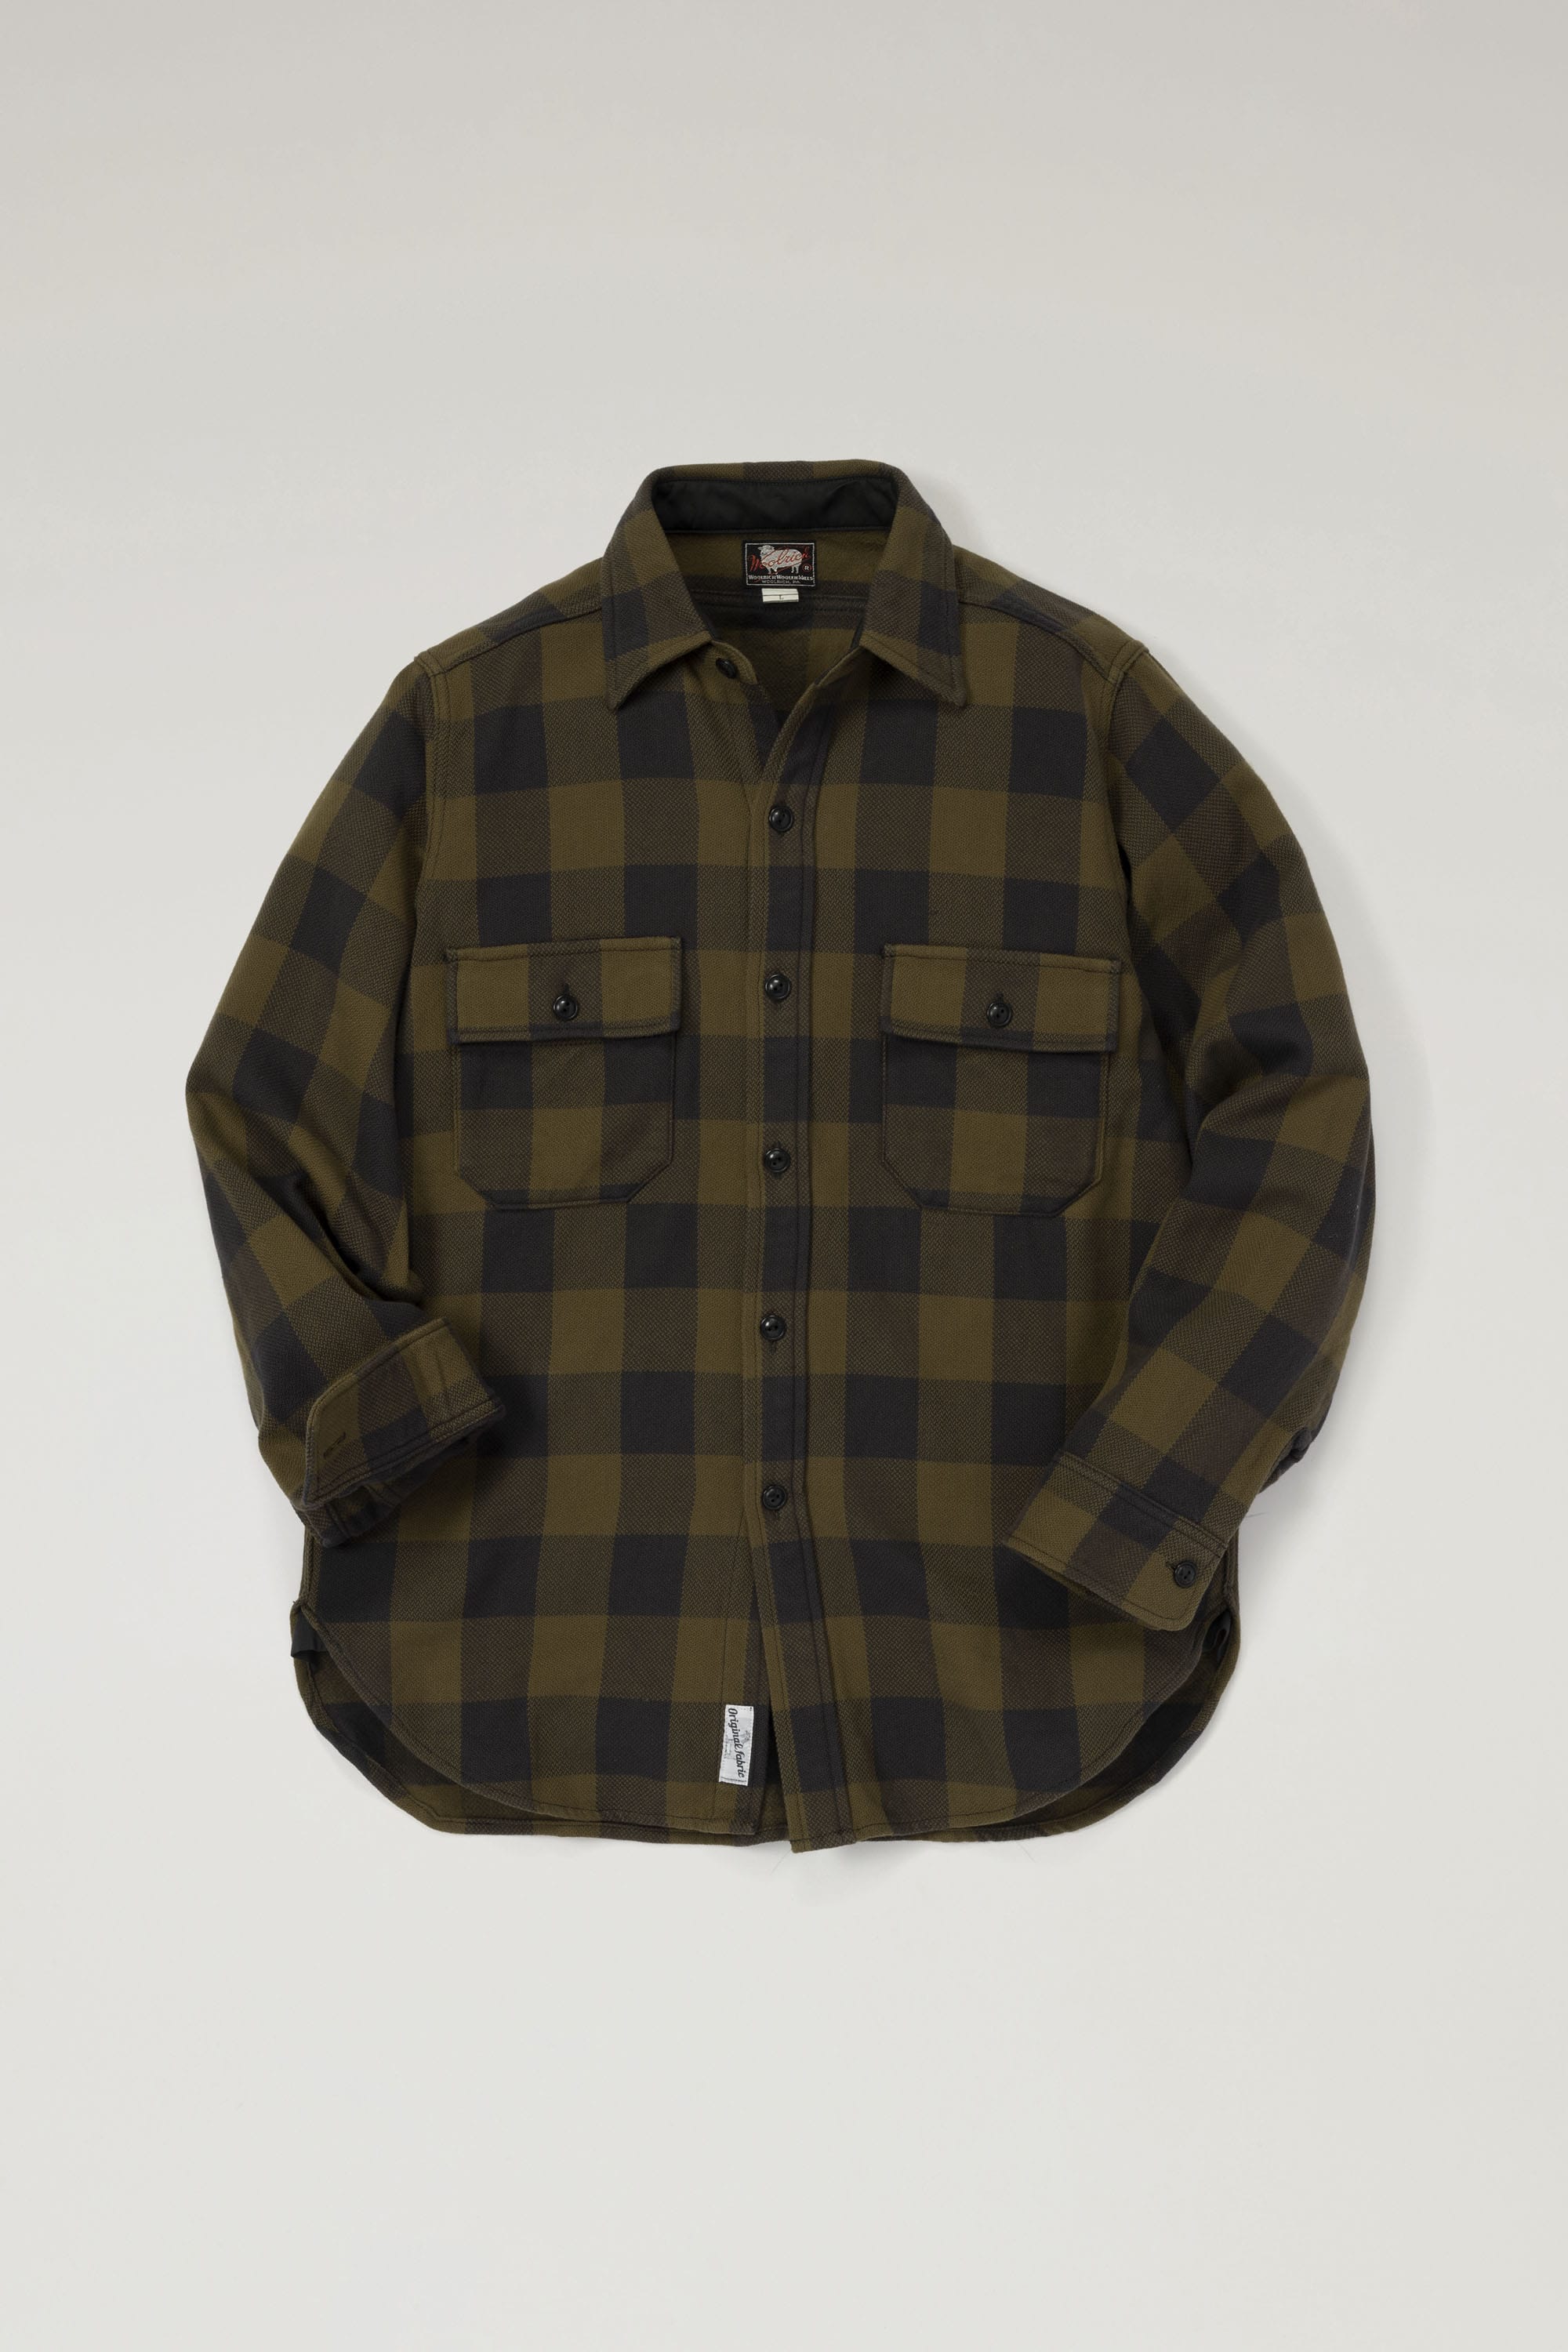 LONG SLEEVE AUTHENTIC FLANNEL SHIRT